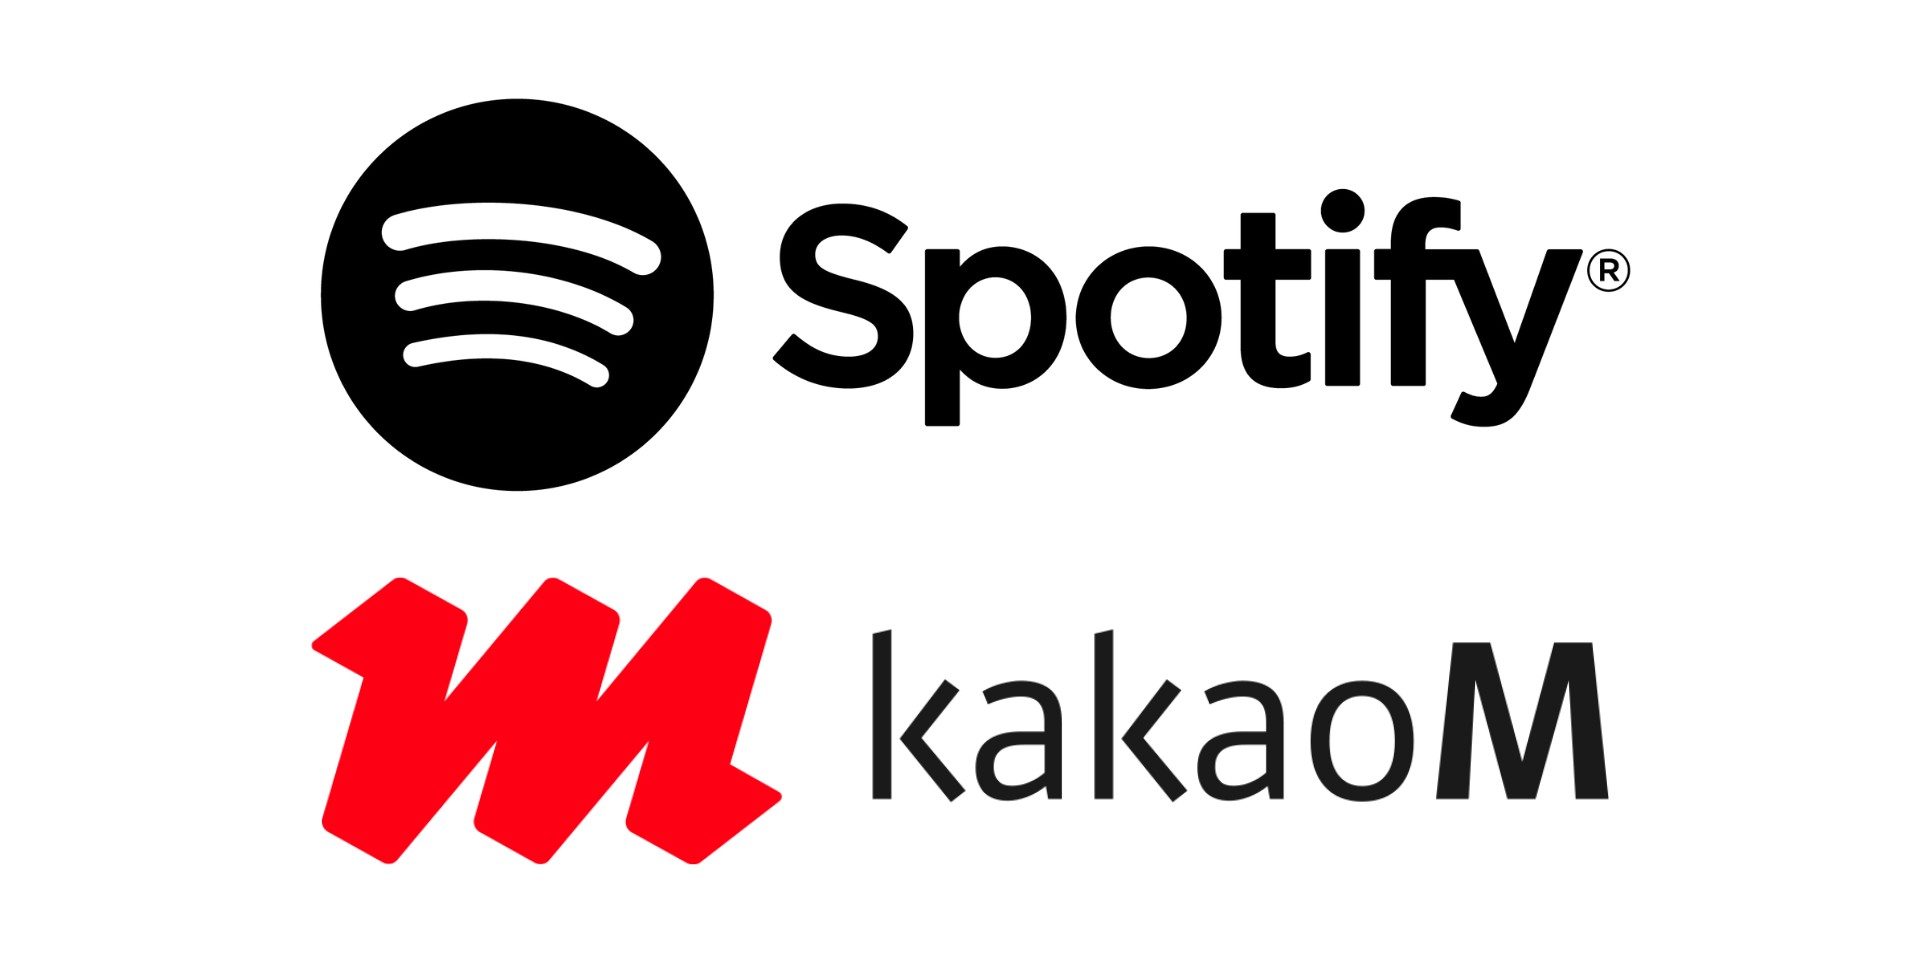 K-pop songs under Kakao M are no longer available on Spotify